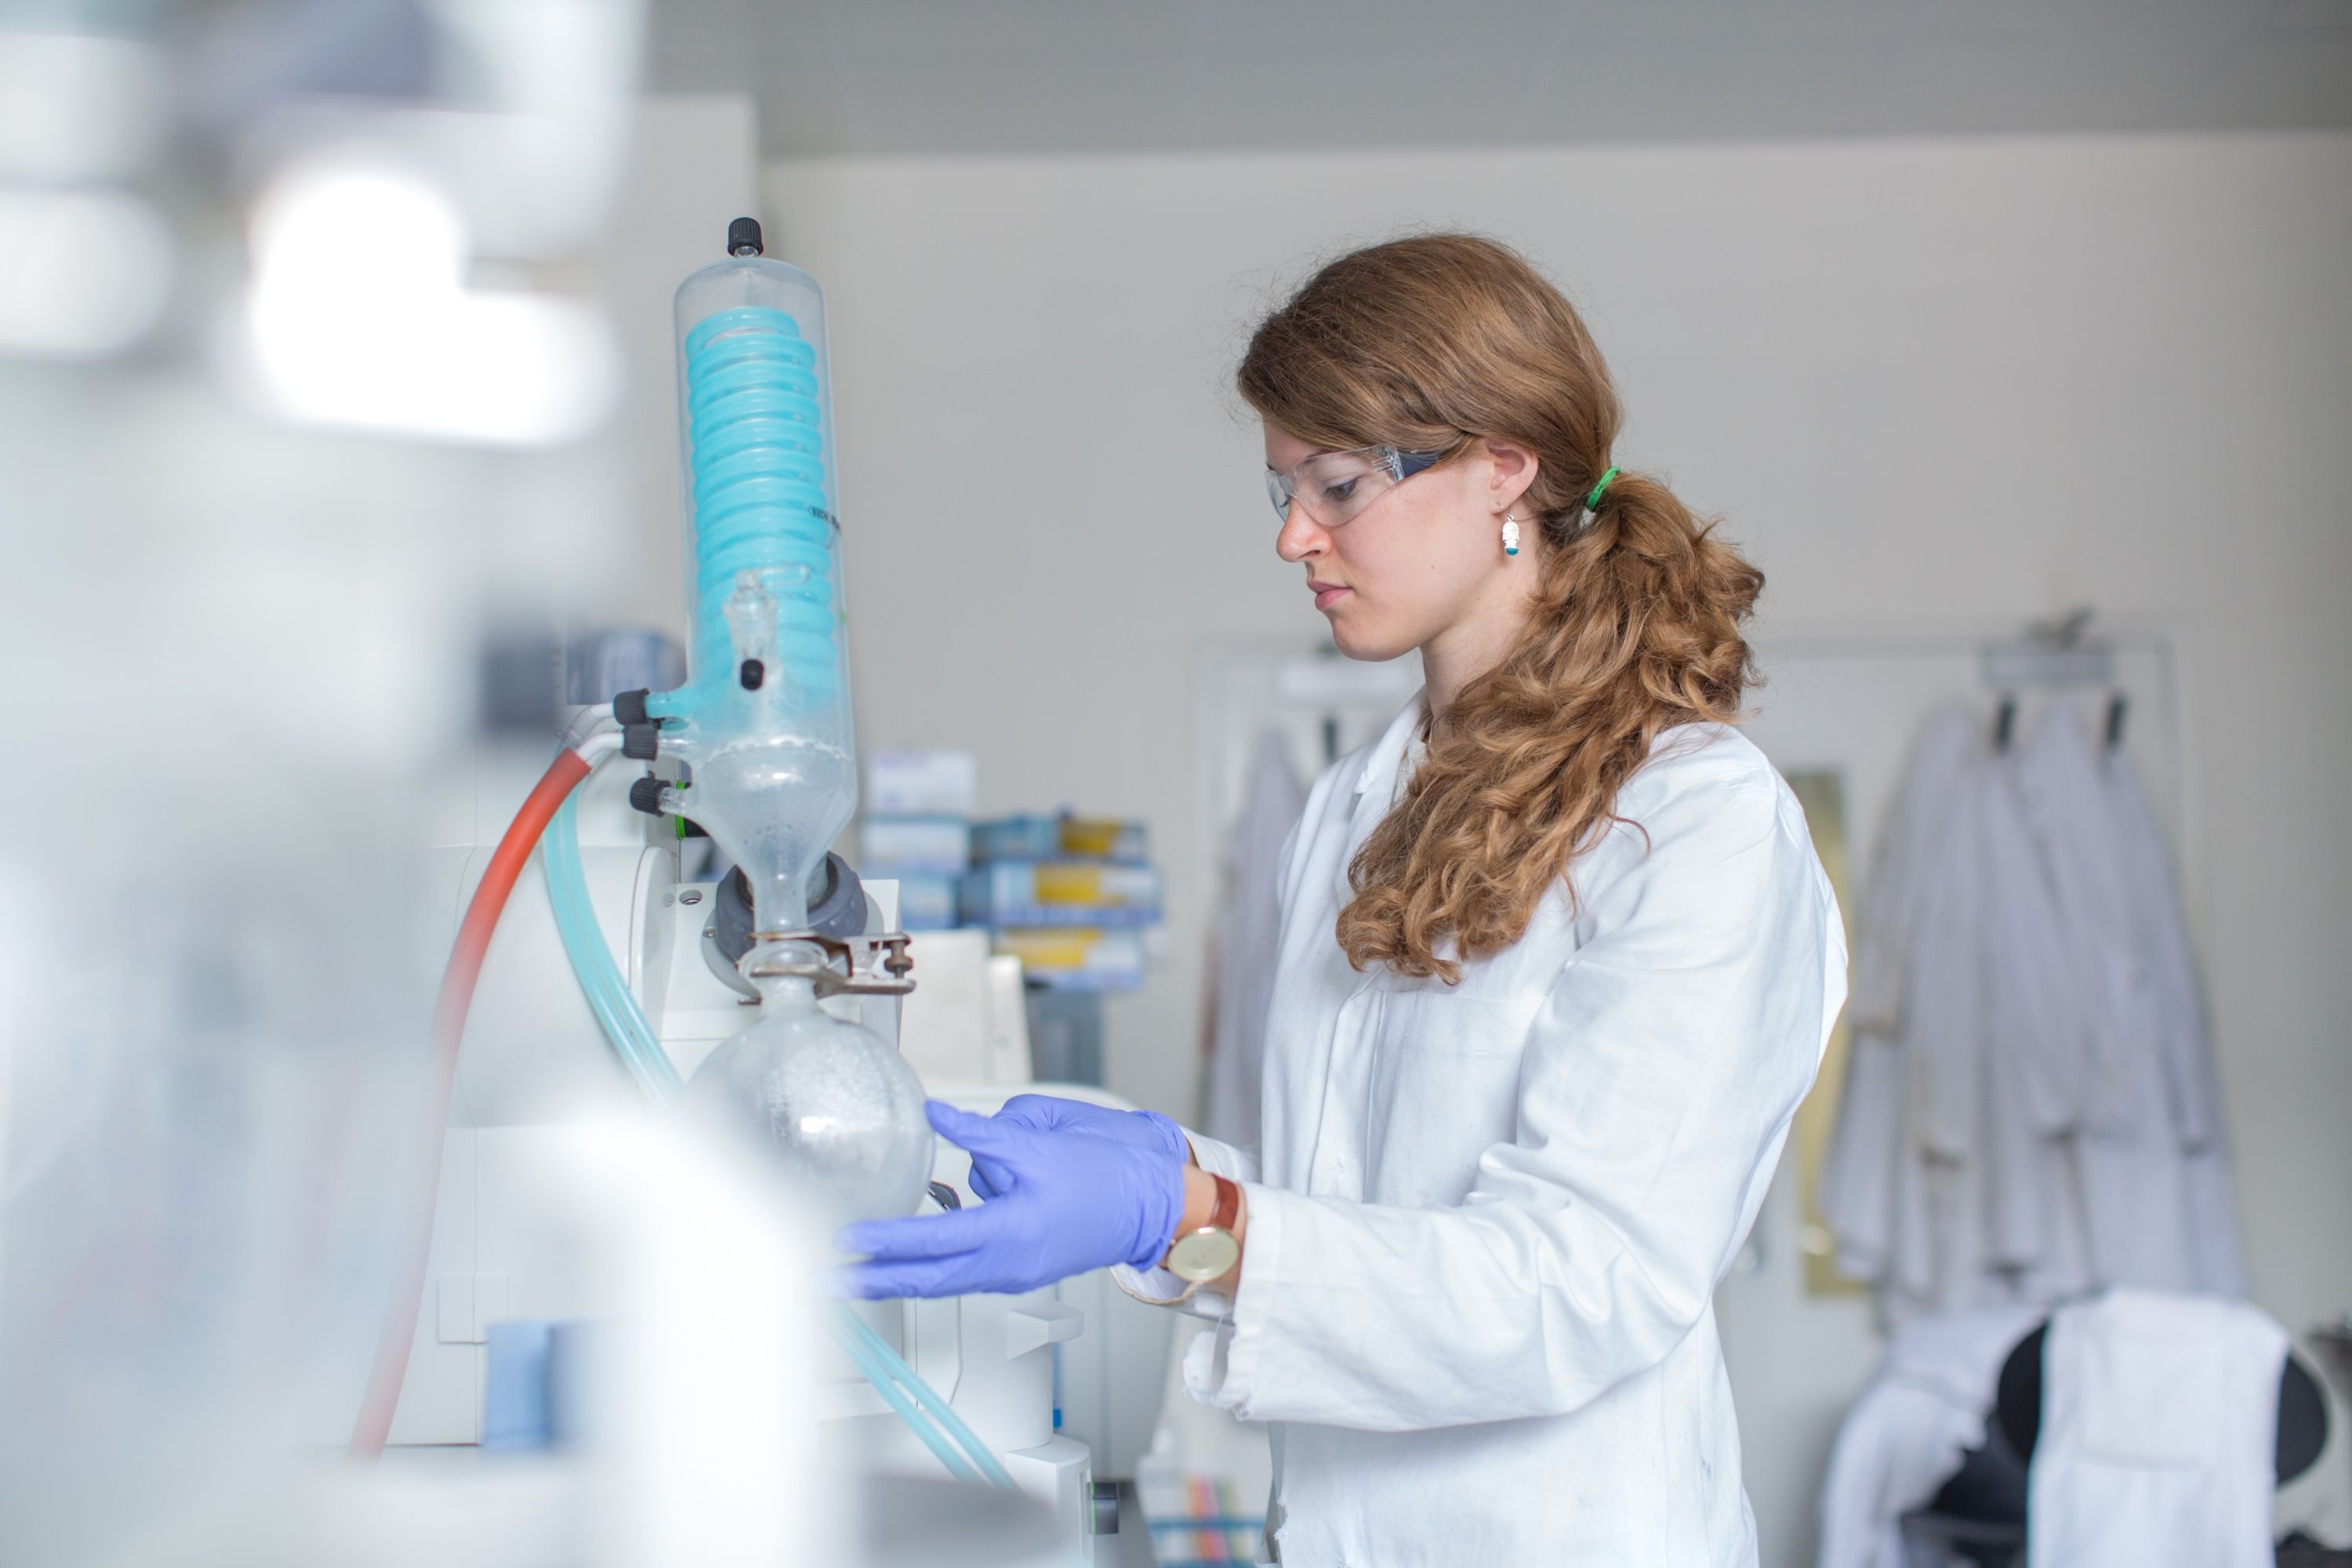 A female student working in the lab